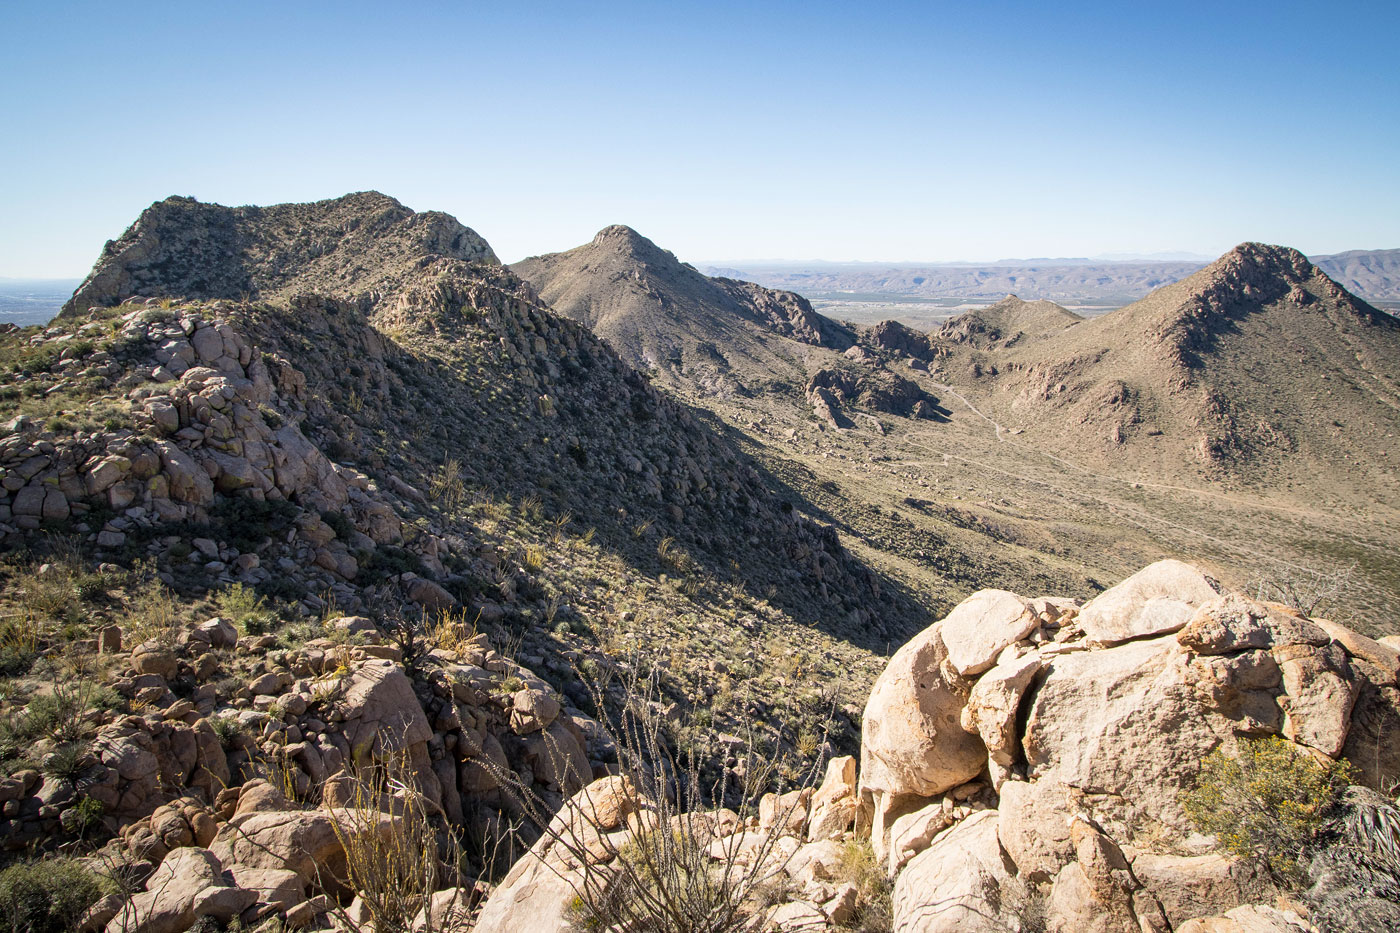 Hike Doña Ana Mountains in Organ Mountains - Desert Peaks National Monument, New Mexico - Stav is Lost